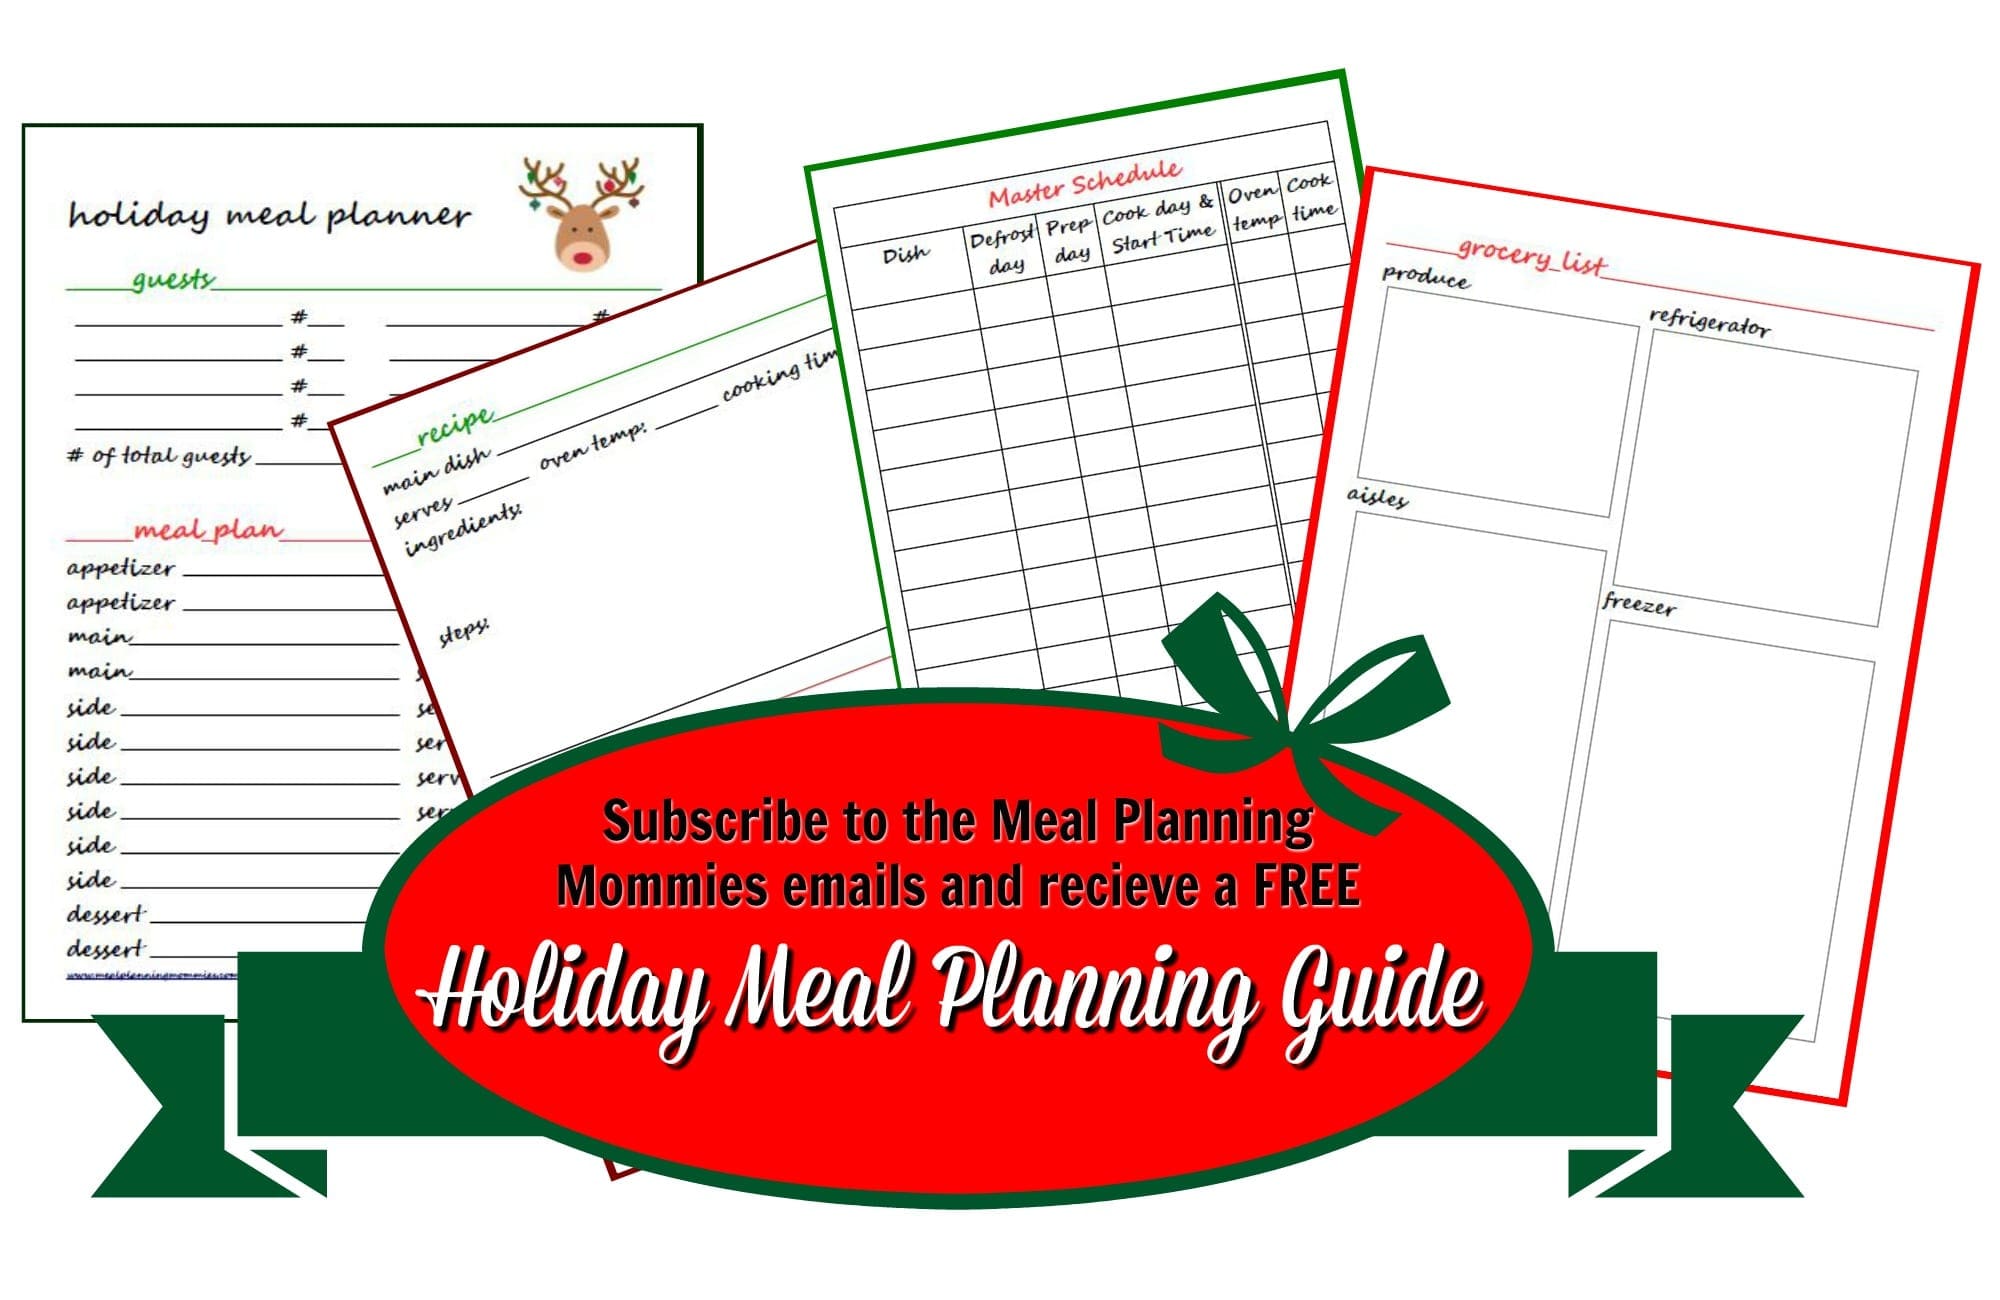 subscribe-to-the-mpm-emails-and-get-a-free-holiday-meal-planning-guide